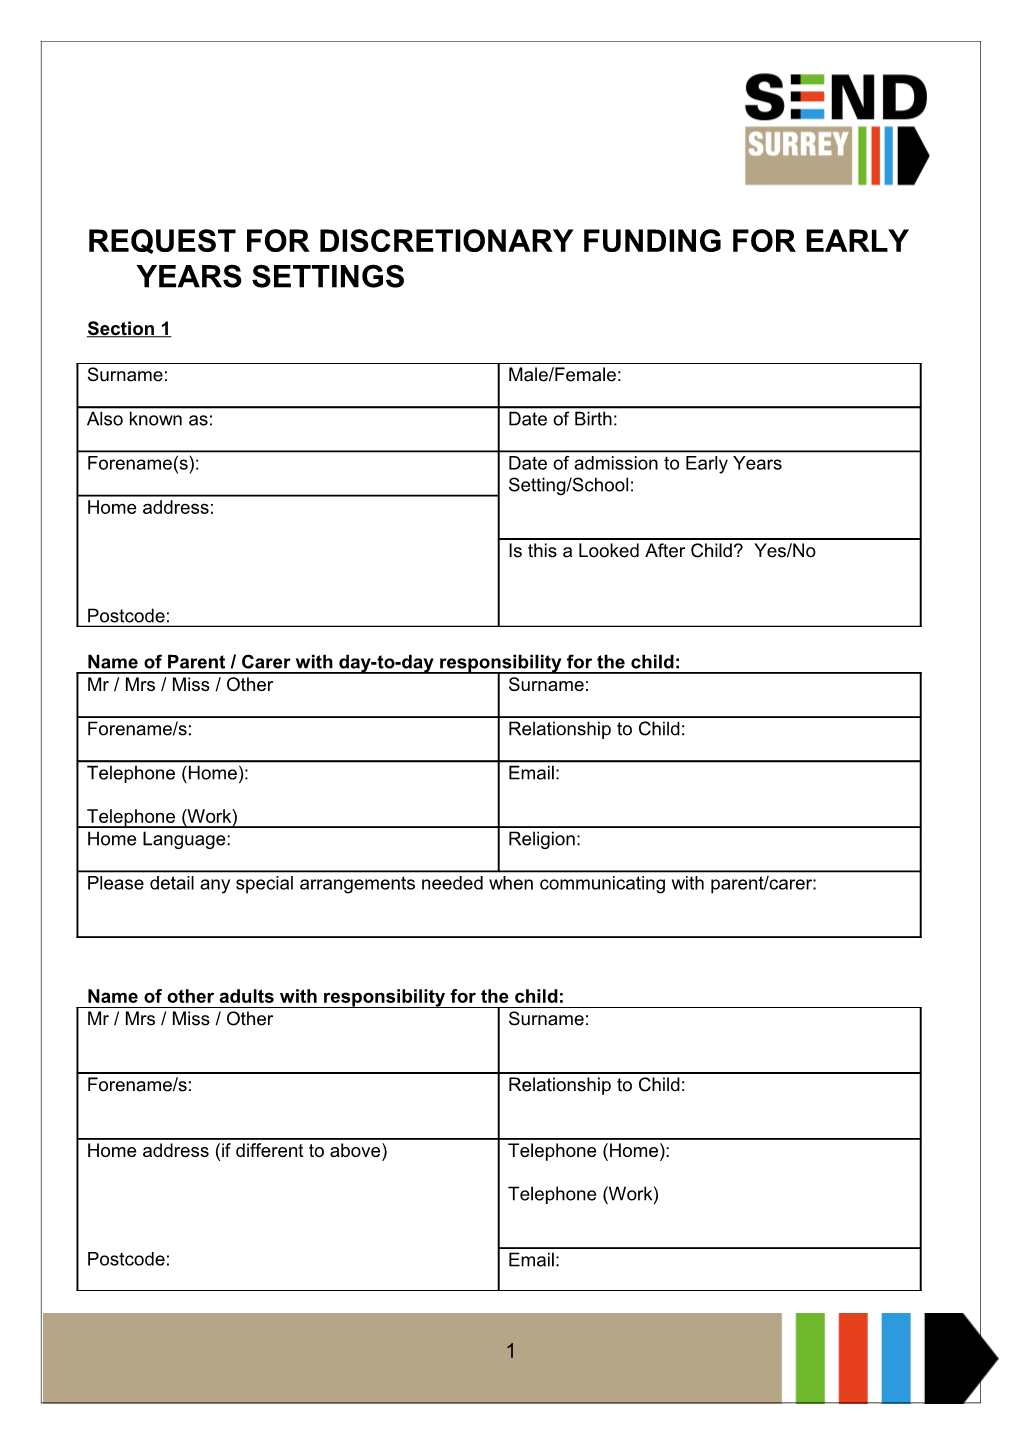 EY Request for Discretionary Funding Form